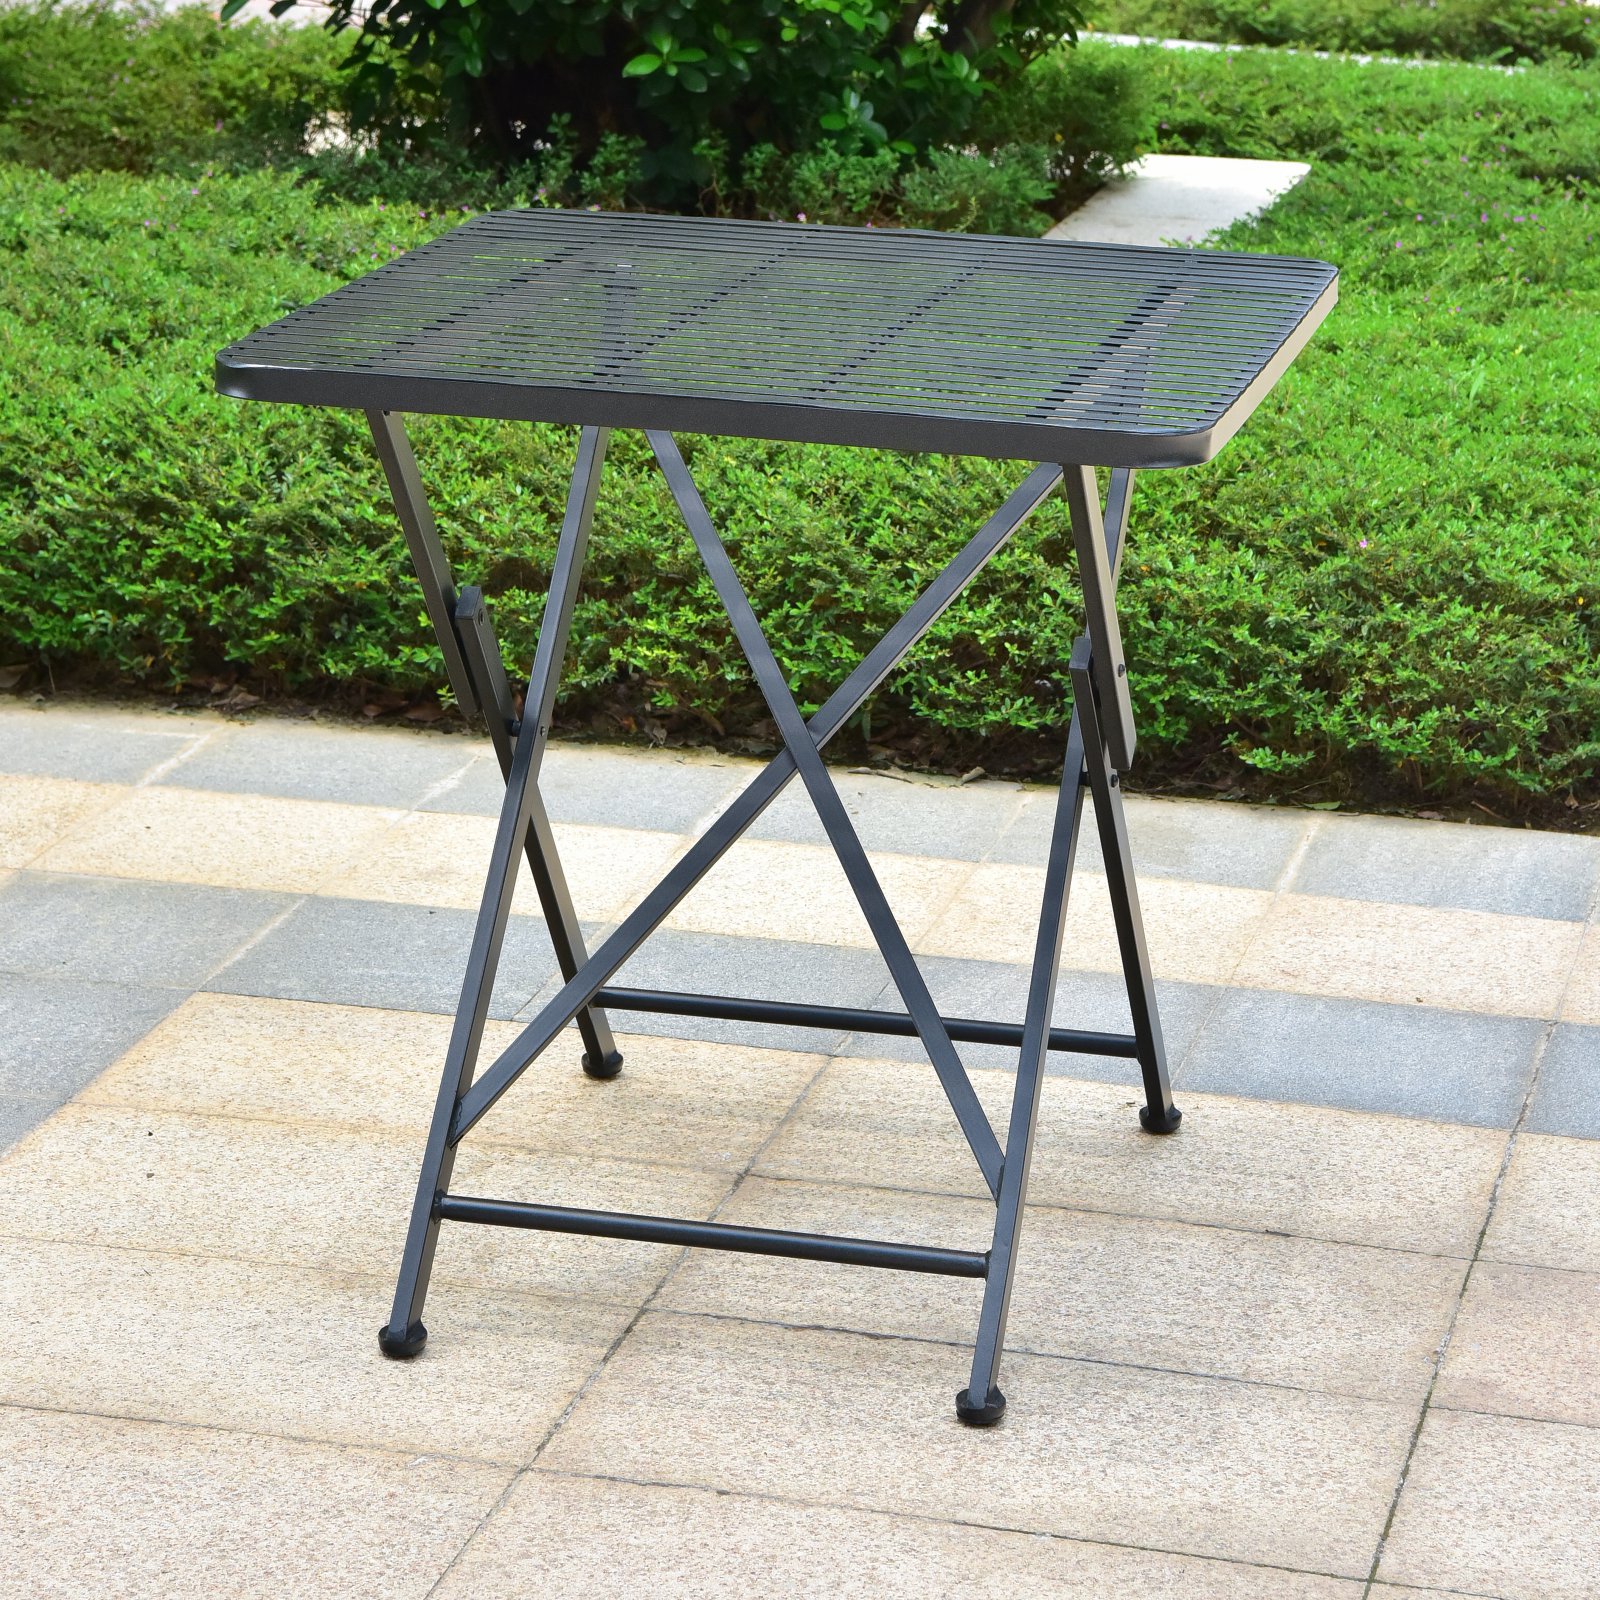 Mandalay Outdoor Iron 28-inch Folding Square Bistro Table - image 1 of 2